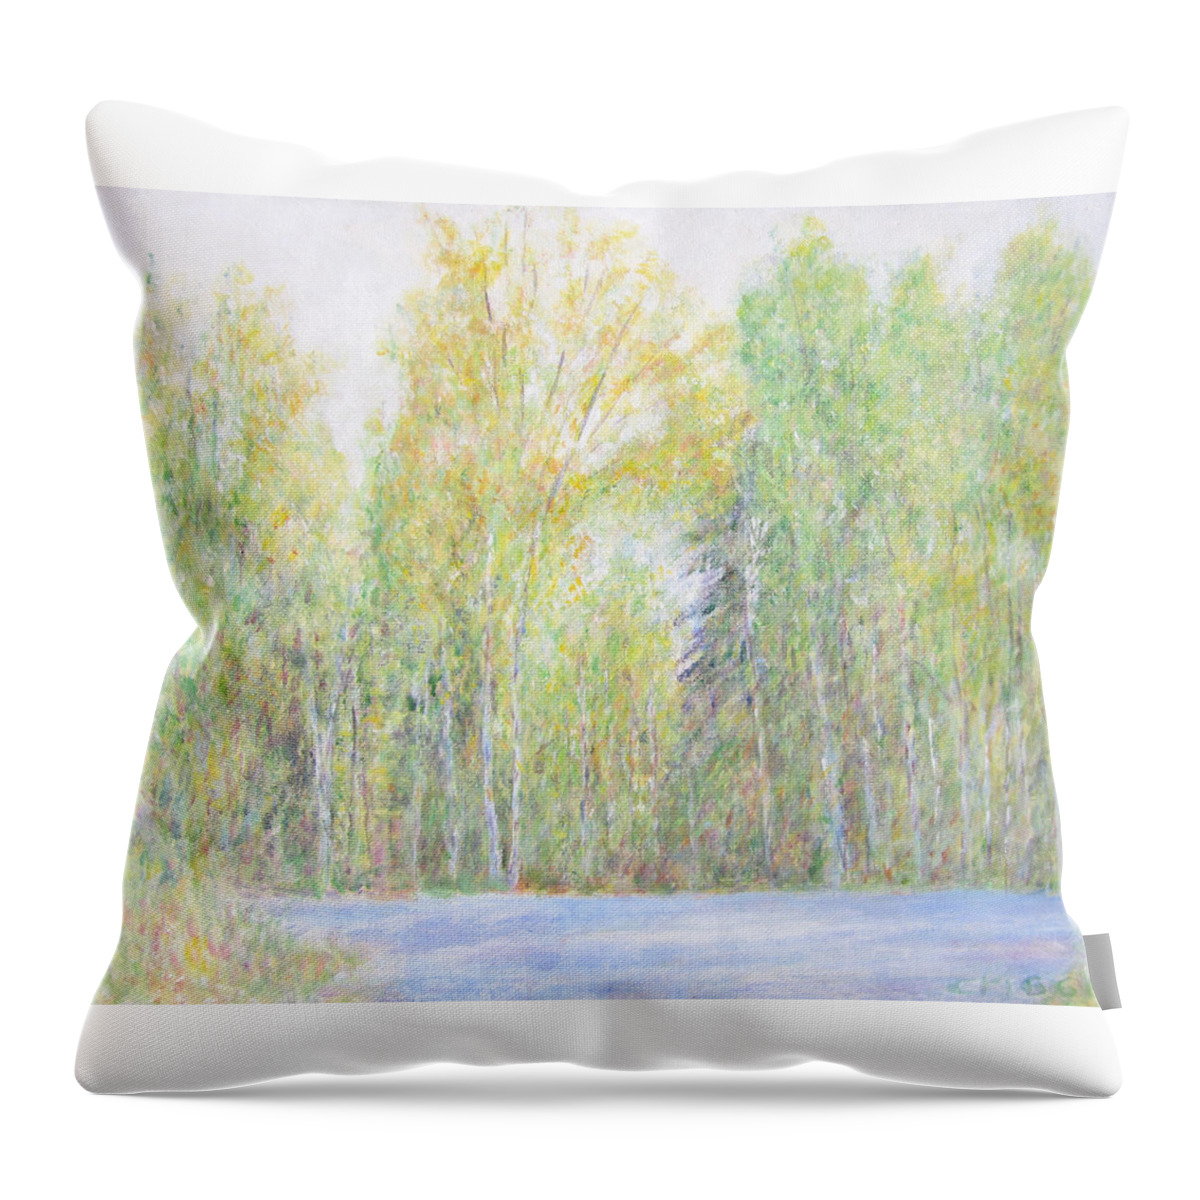 Impressionism Throw Pillow featuring the painting A Sunny Day by Glenda Crigger